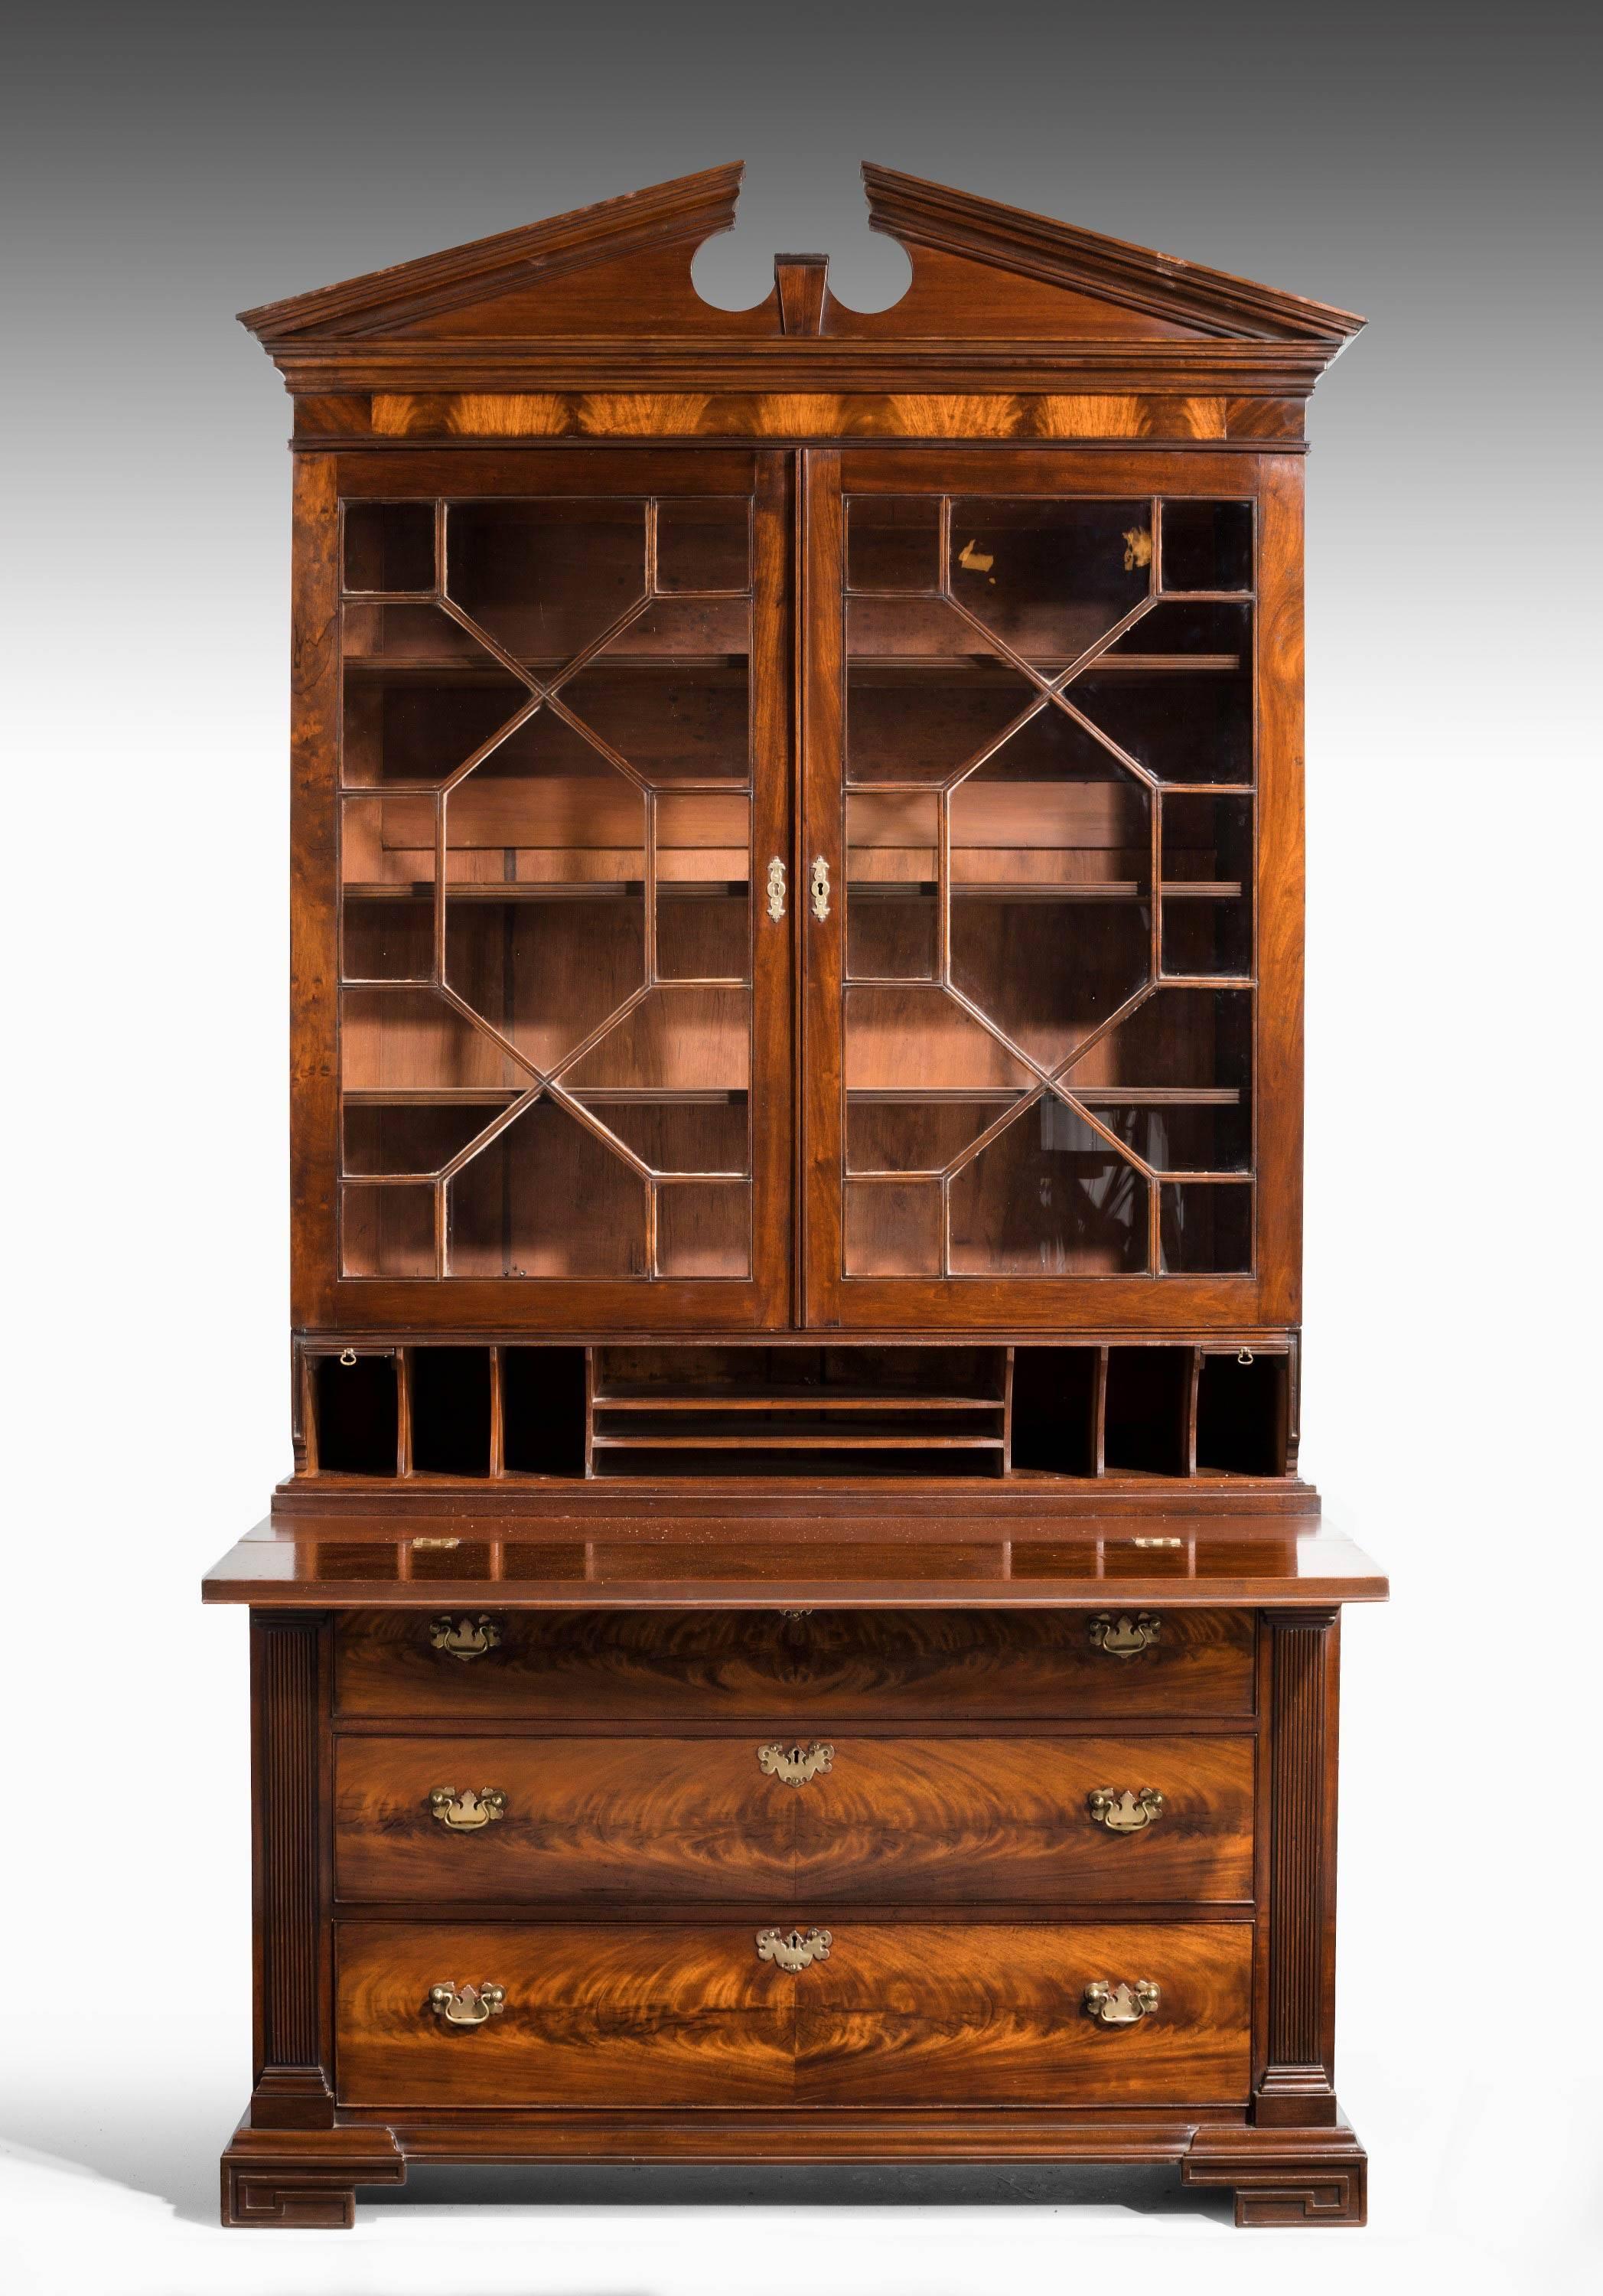 Mahogany Chippendale period mahogany secretaire bookcase with well fitted interior For Sale